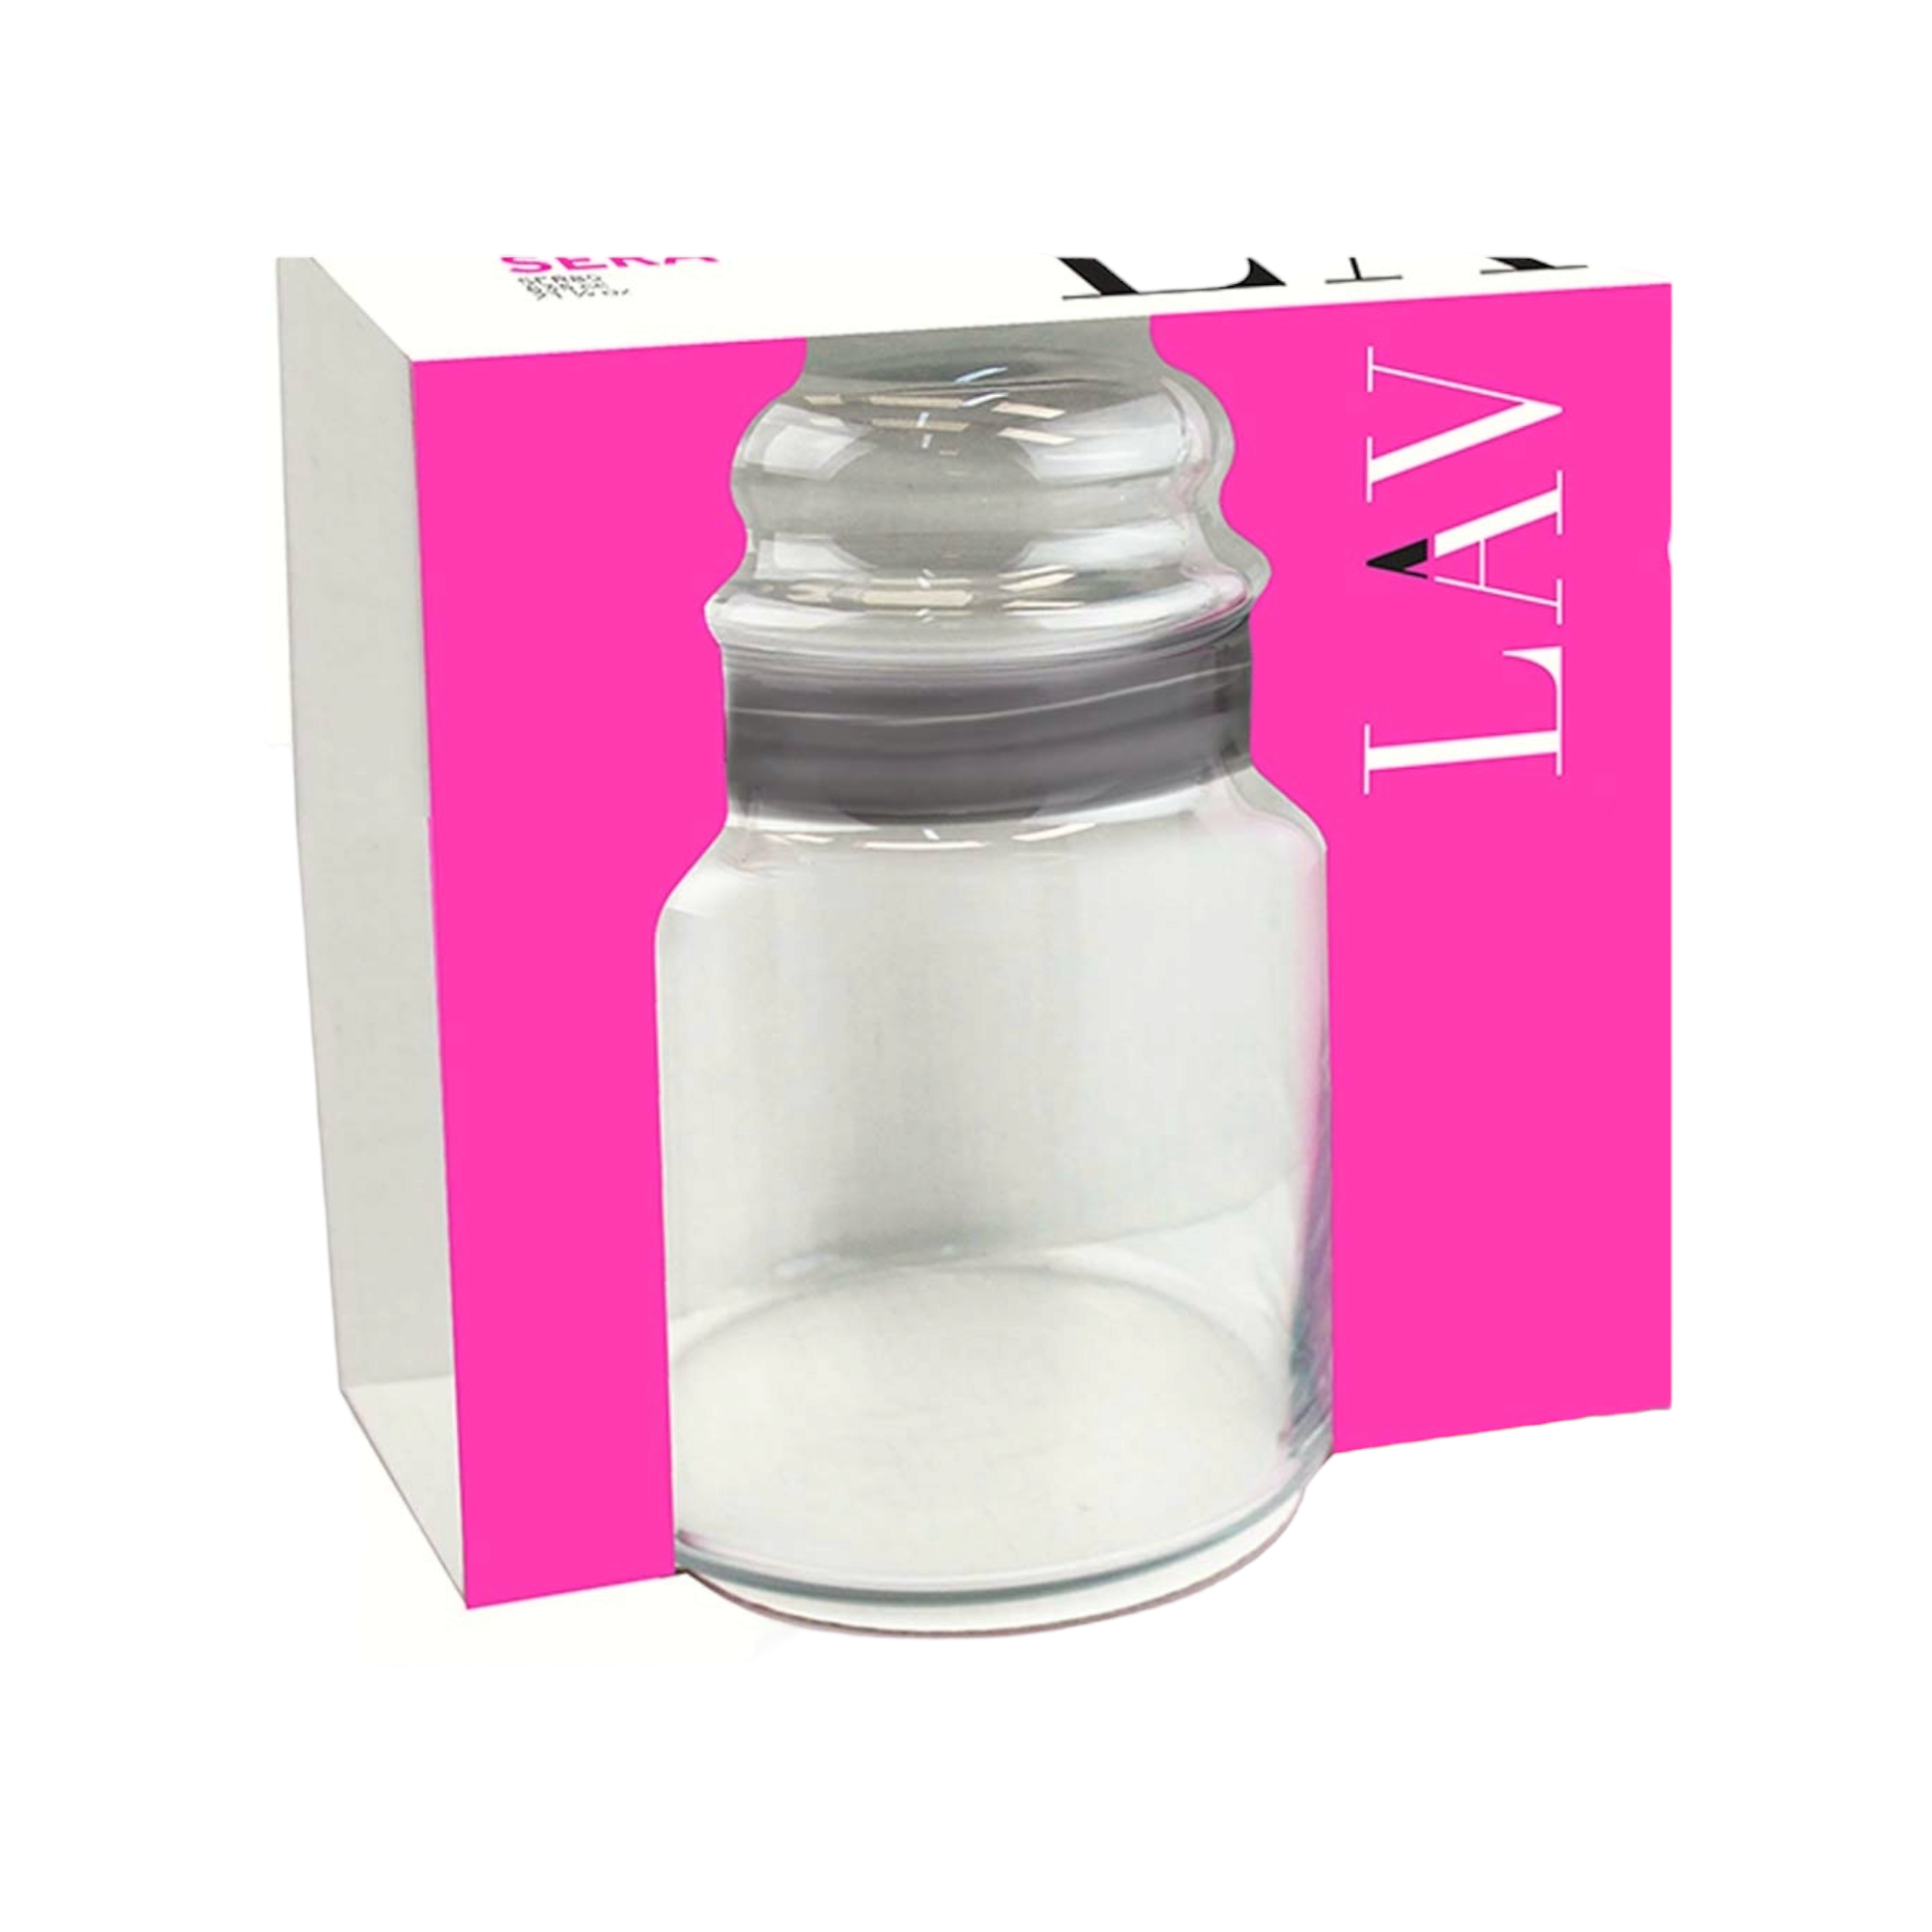 LAV Glass Canister Jar 635ml with Grey Lid SGN2385